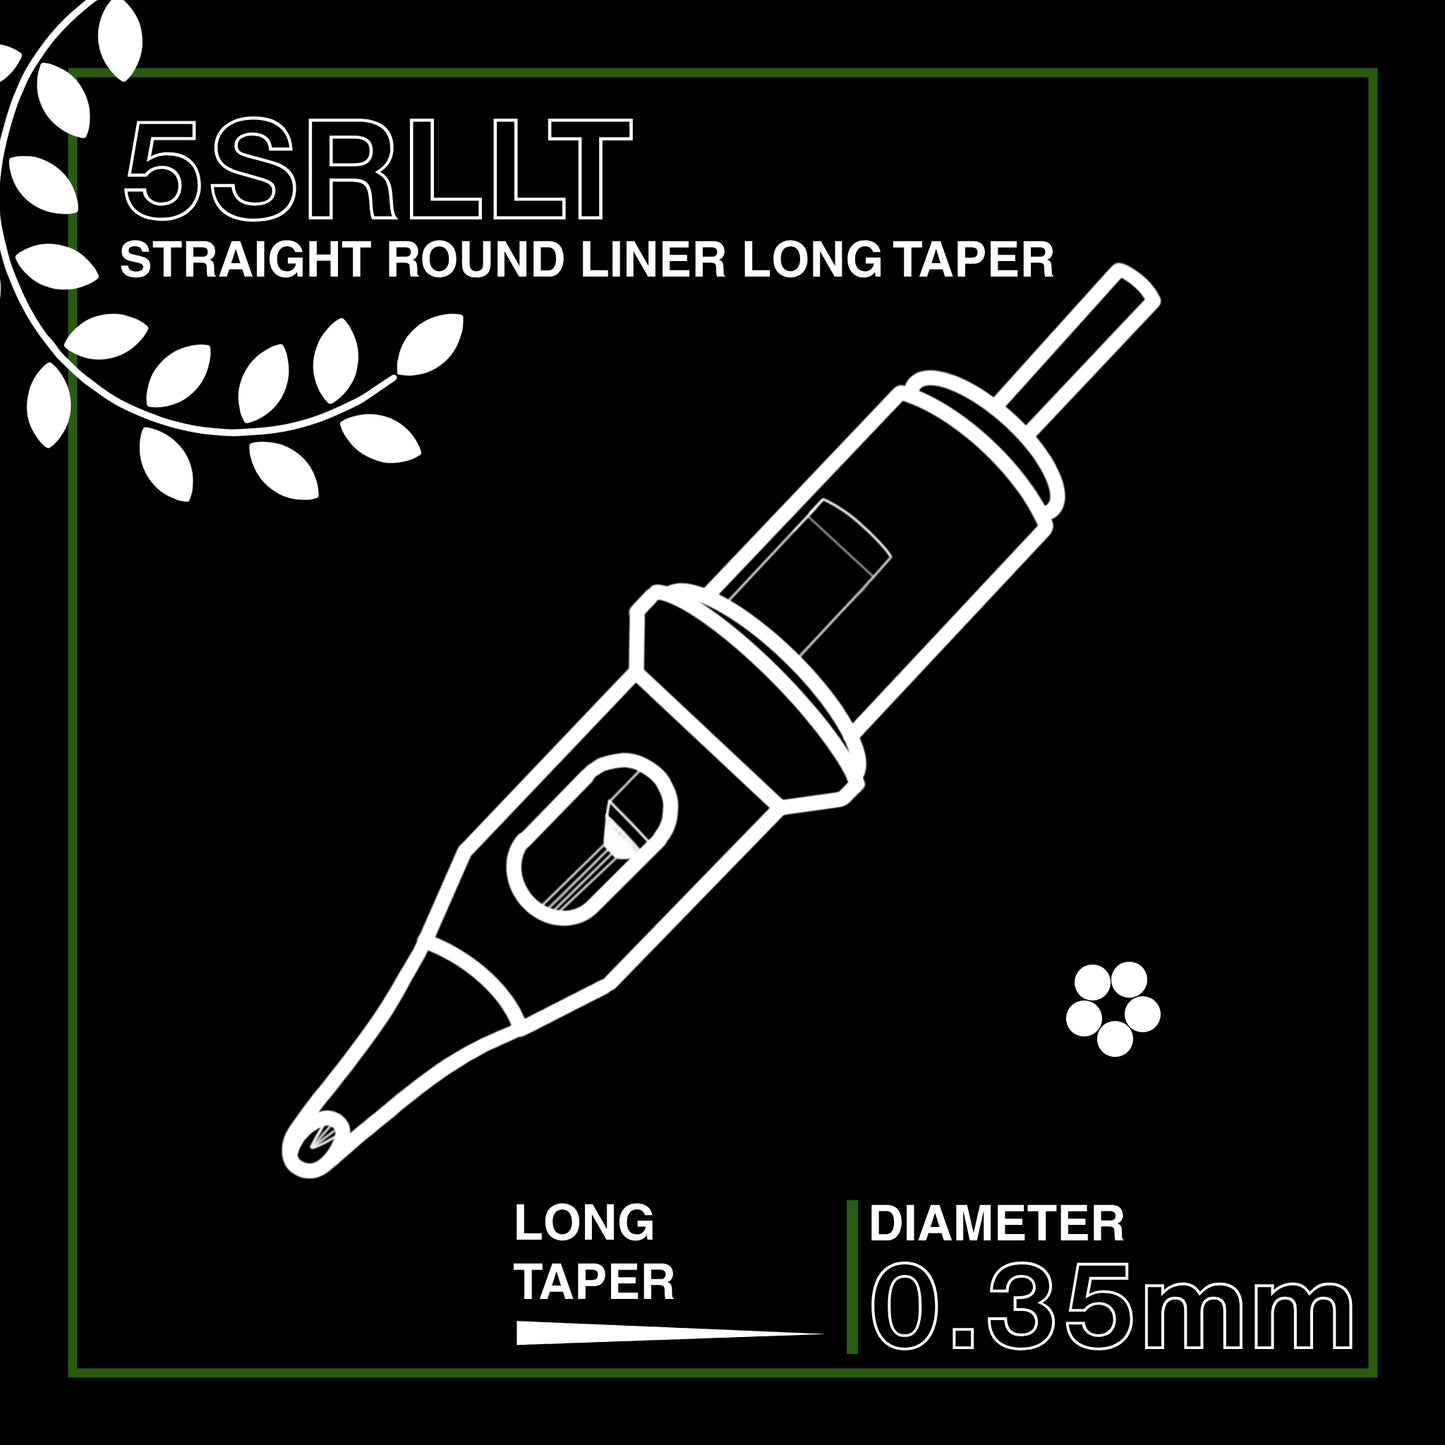 Straight Round Liner Long Taper